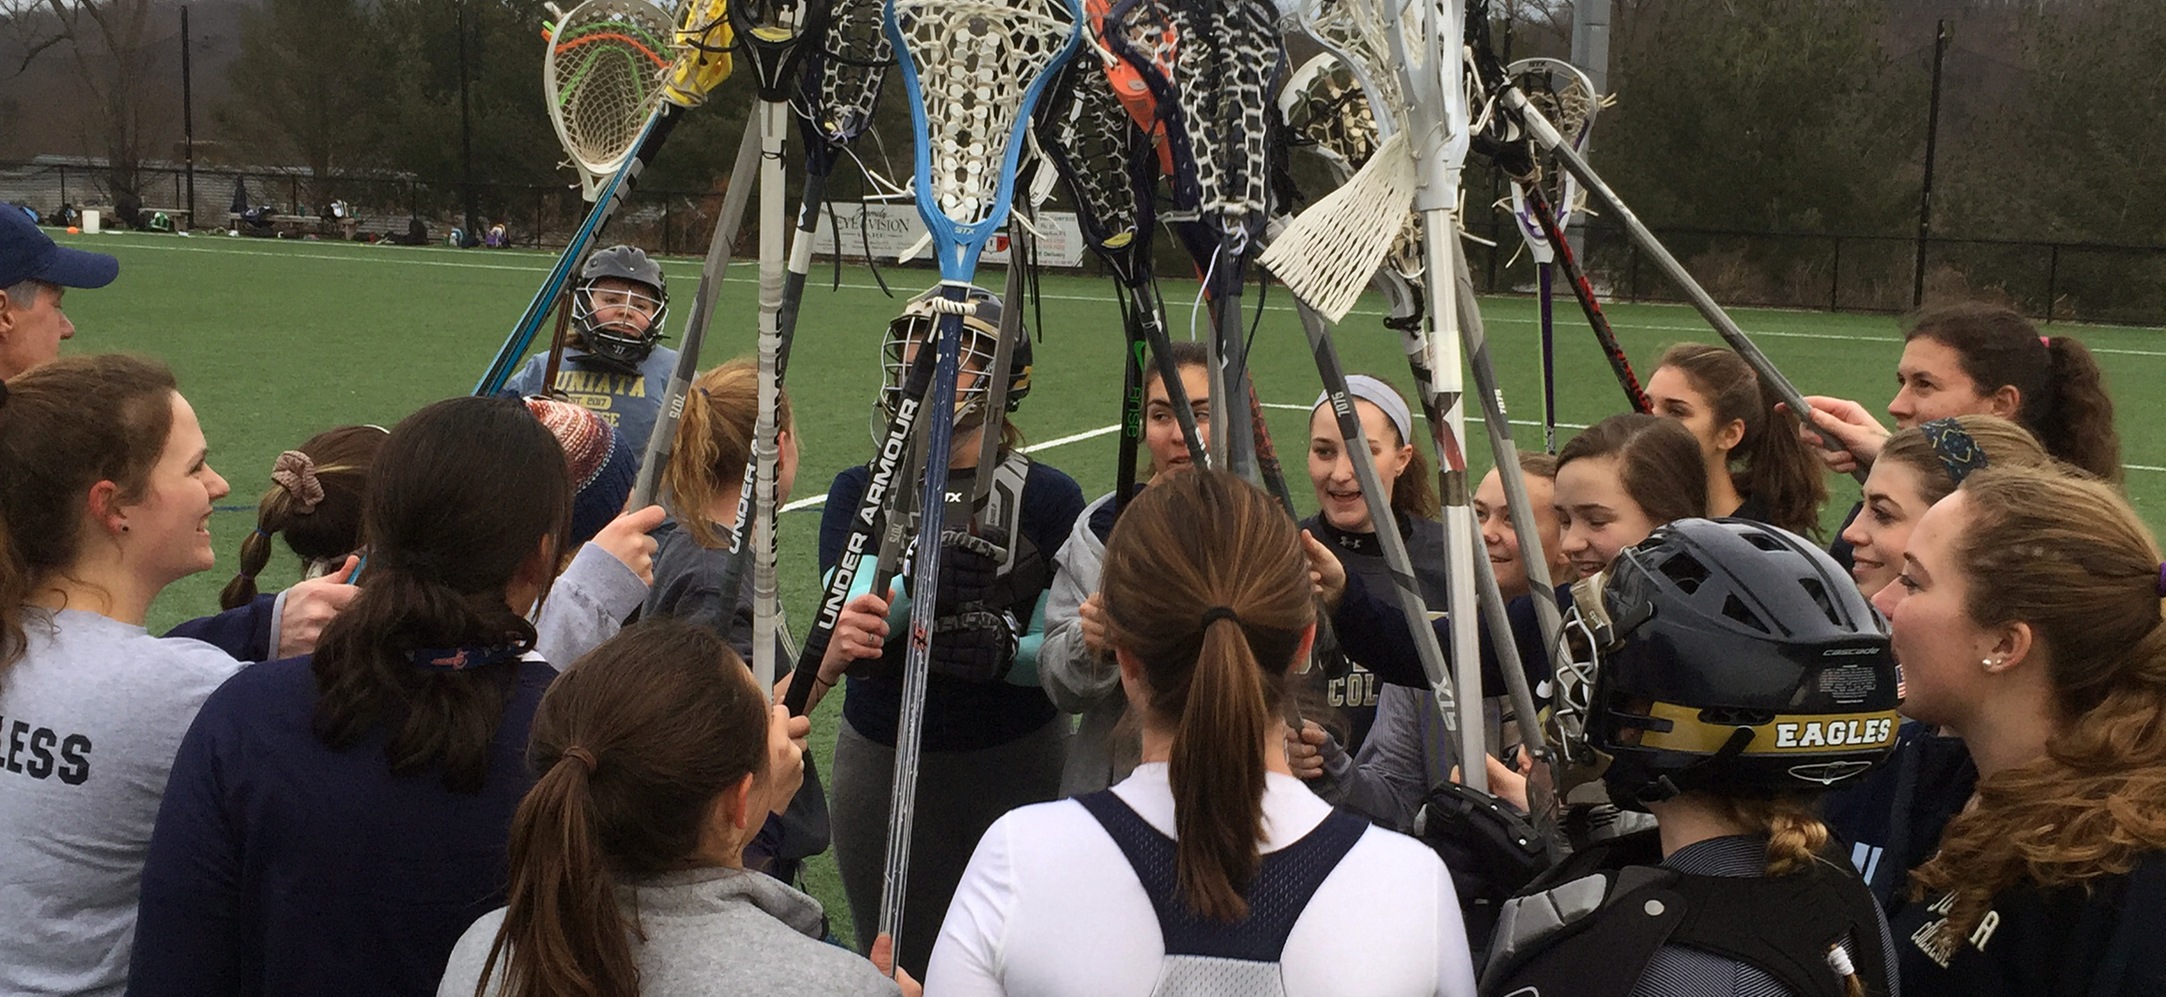 Women's Lacrosse Wins First Ever Game Against Chatham